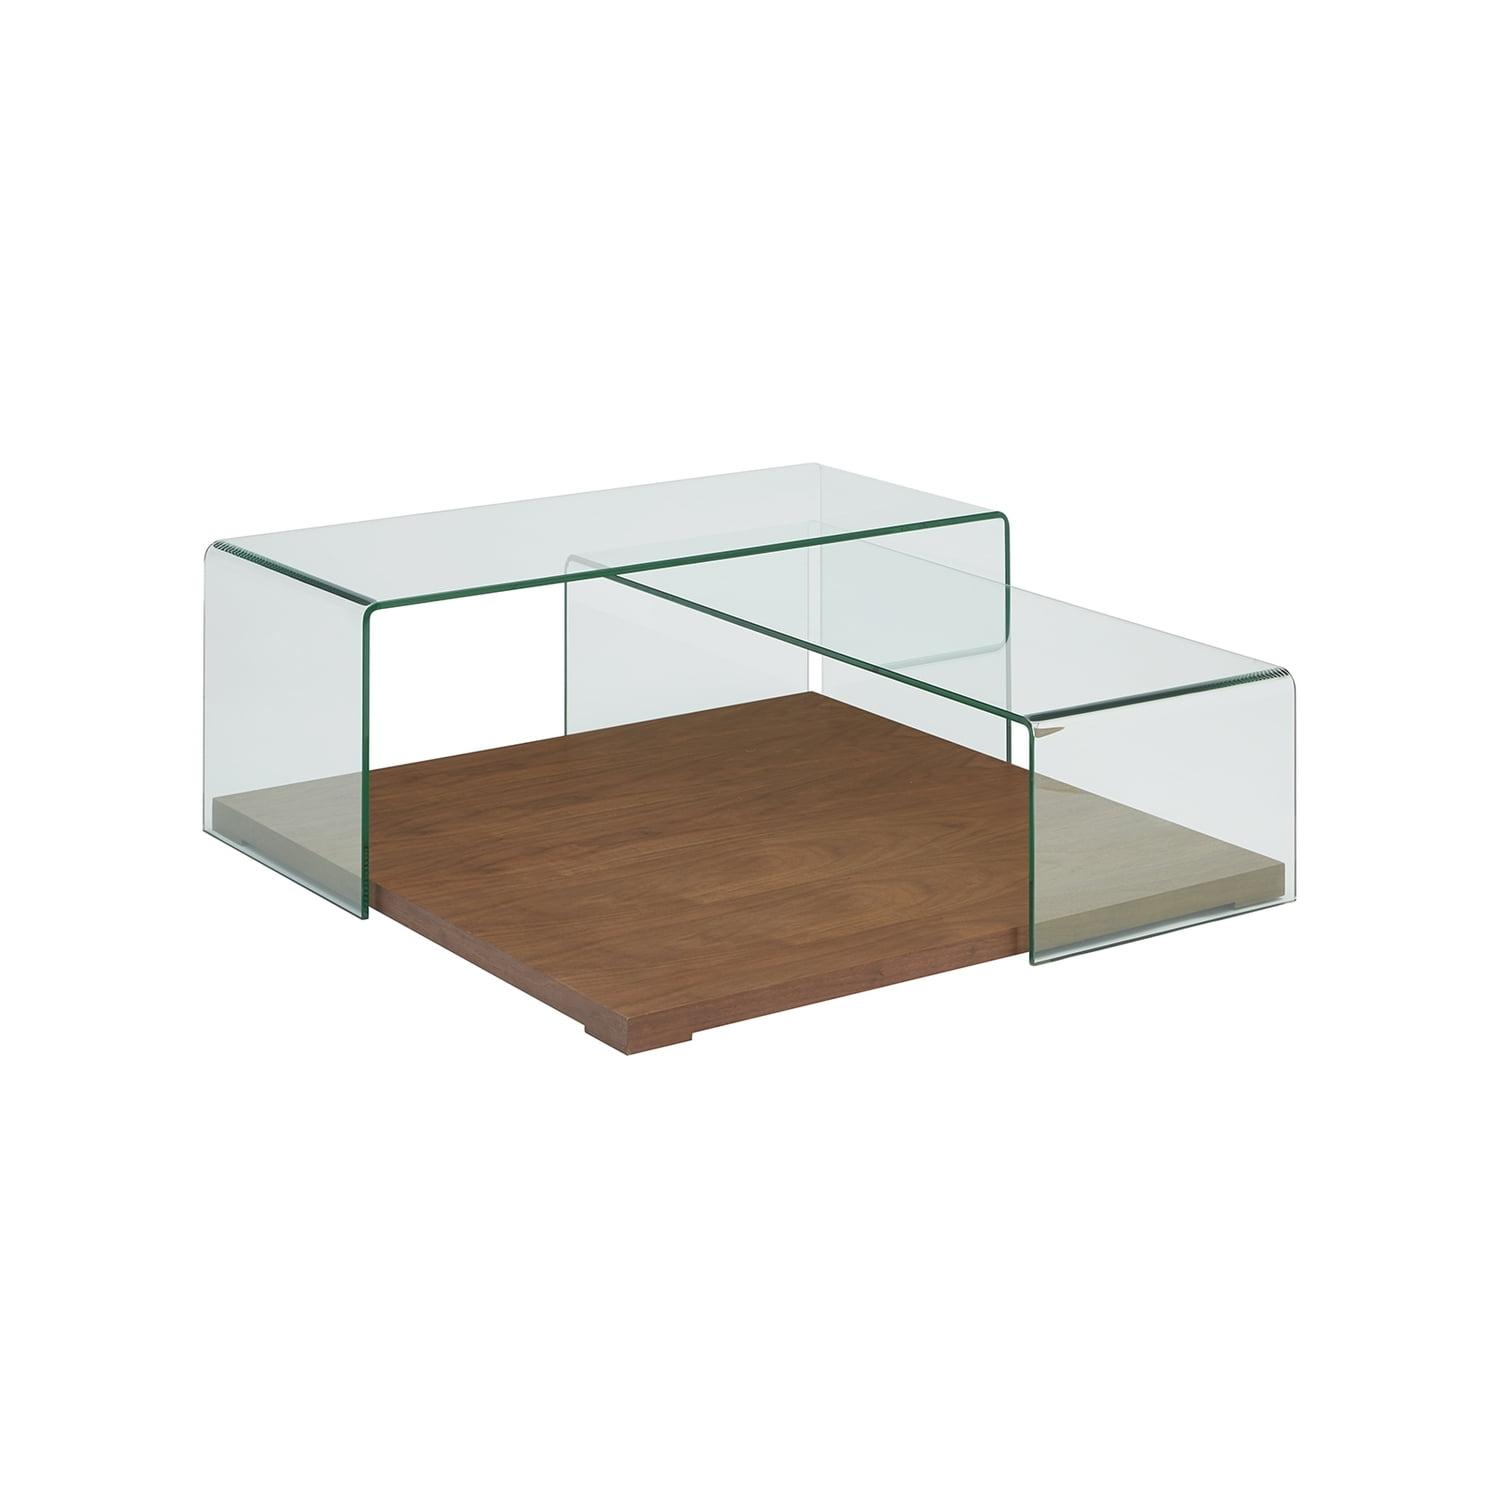 Kinetic Walnut Veneer Square Coffee Table with Clear Glass